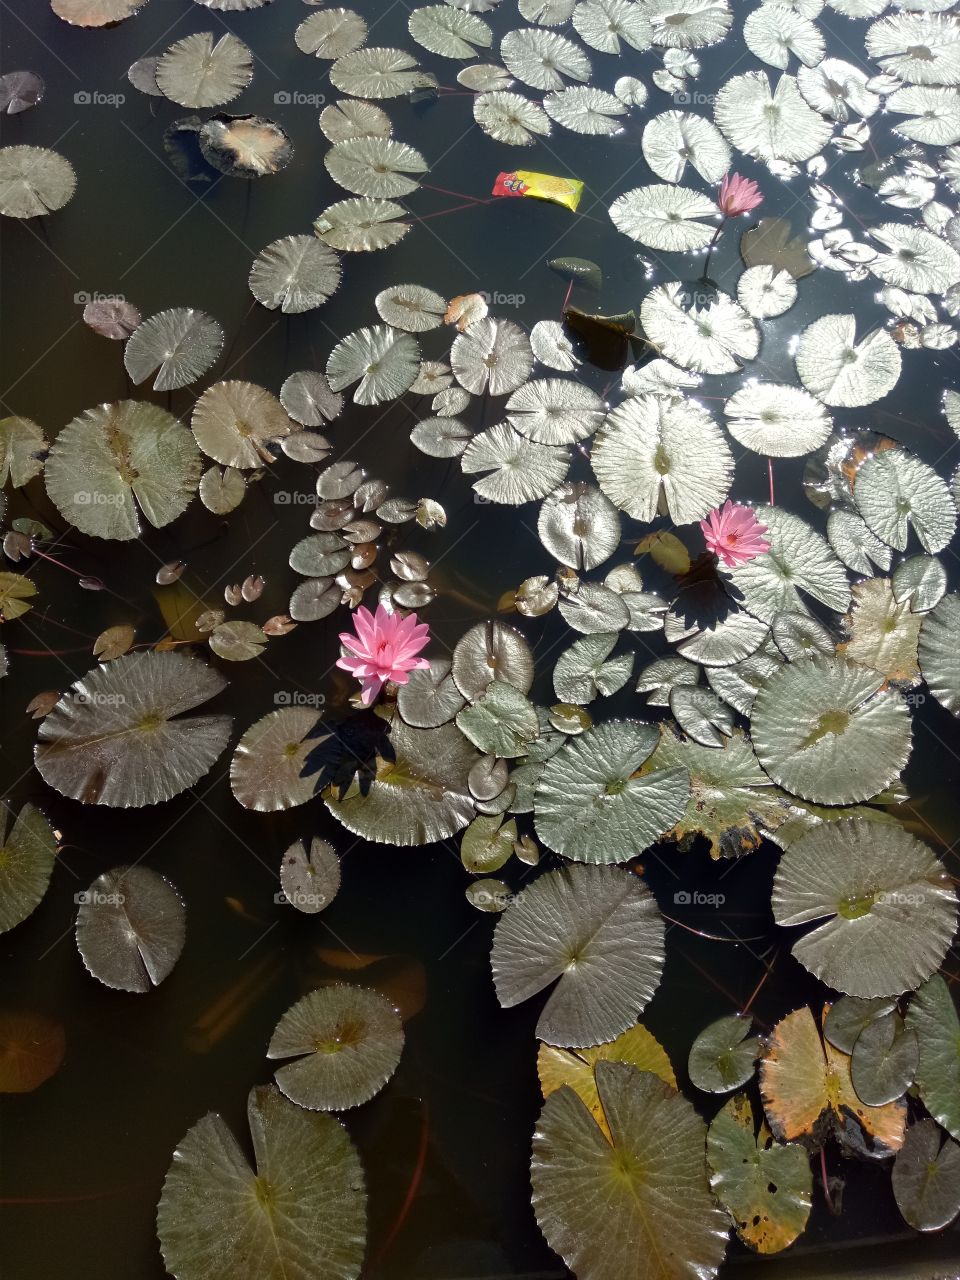 Flower and leaf in lake